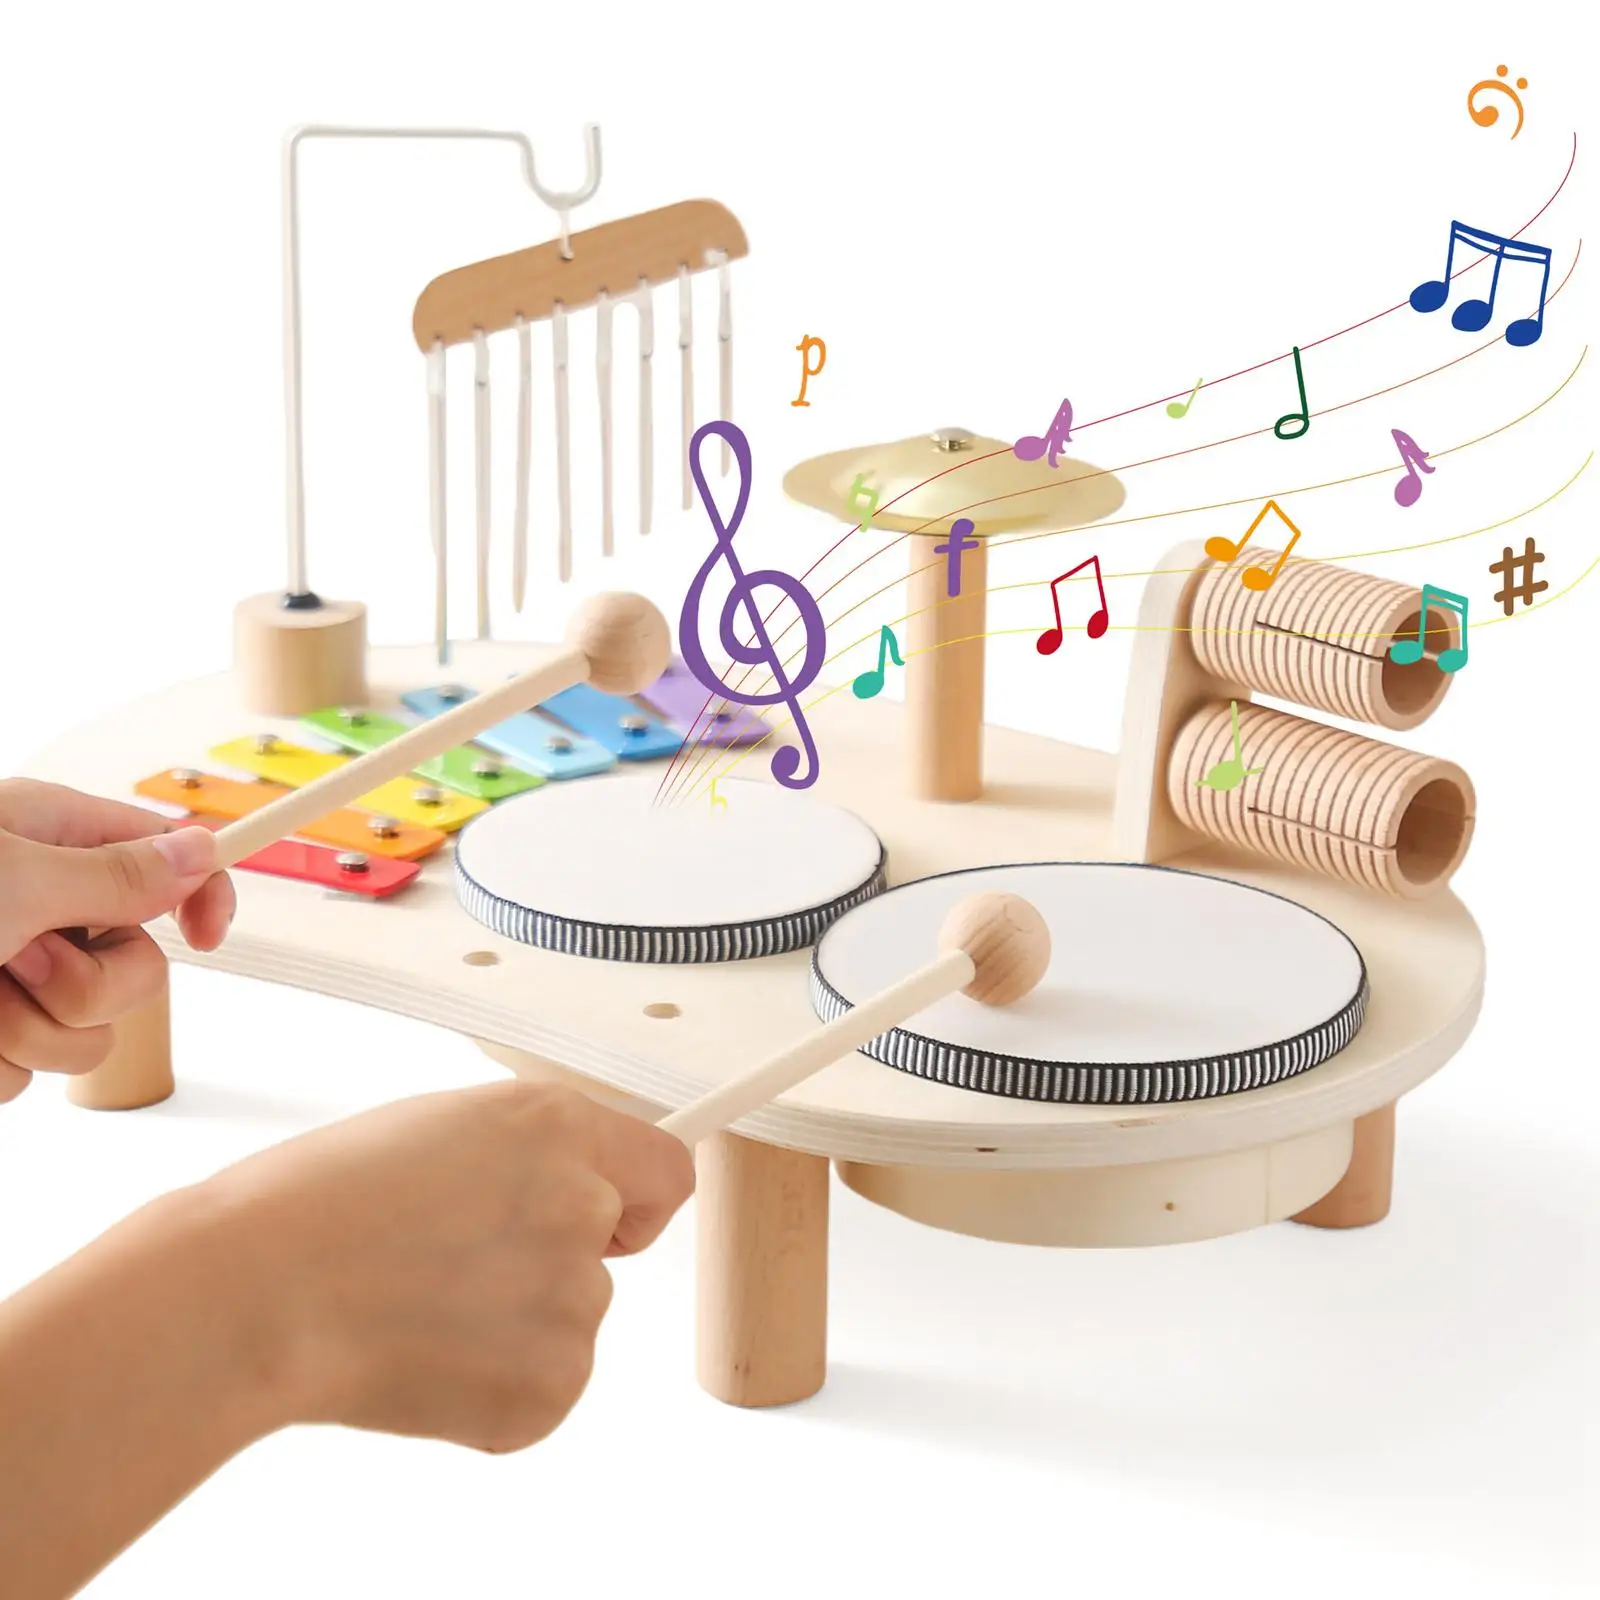 

Xylophone Drum Set Party Favors Music Educational Toy Wooden Percussion for Kids Children Ages 3 4 5 6 Years Old Birthday Gift